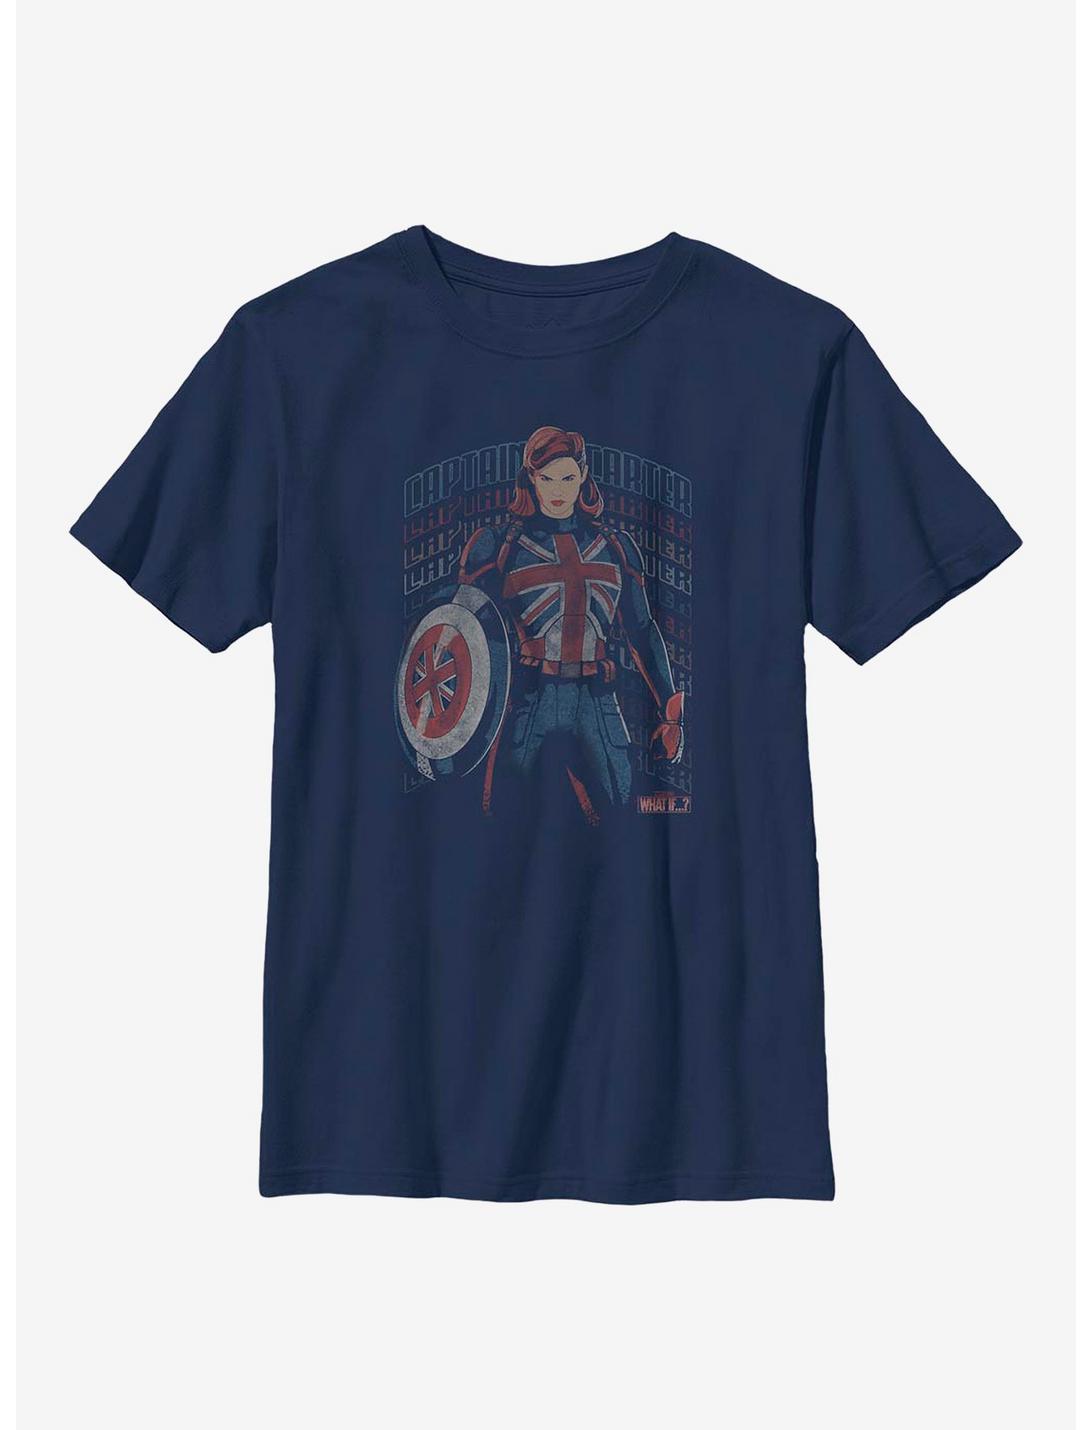 Marvel What If...? Union Carter Youth T-Shirt, NAVY, hi-res